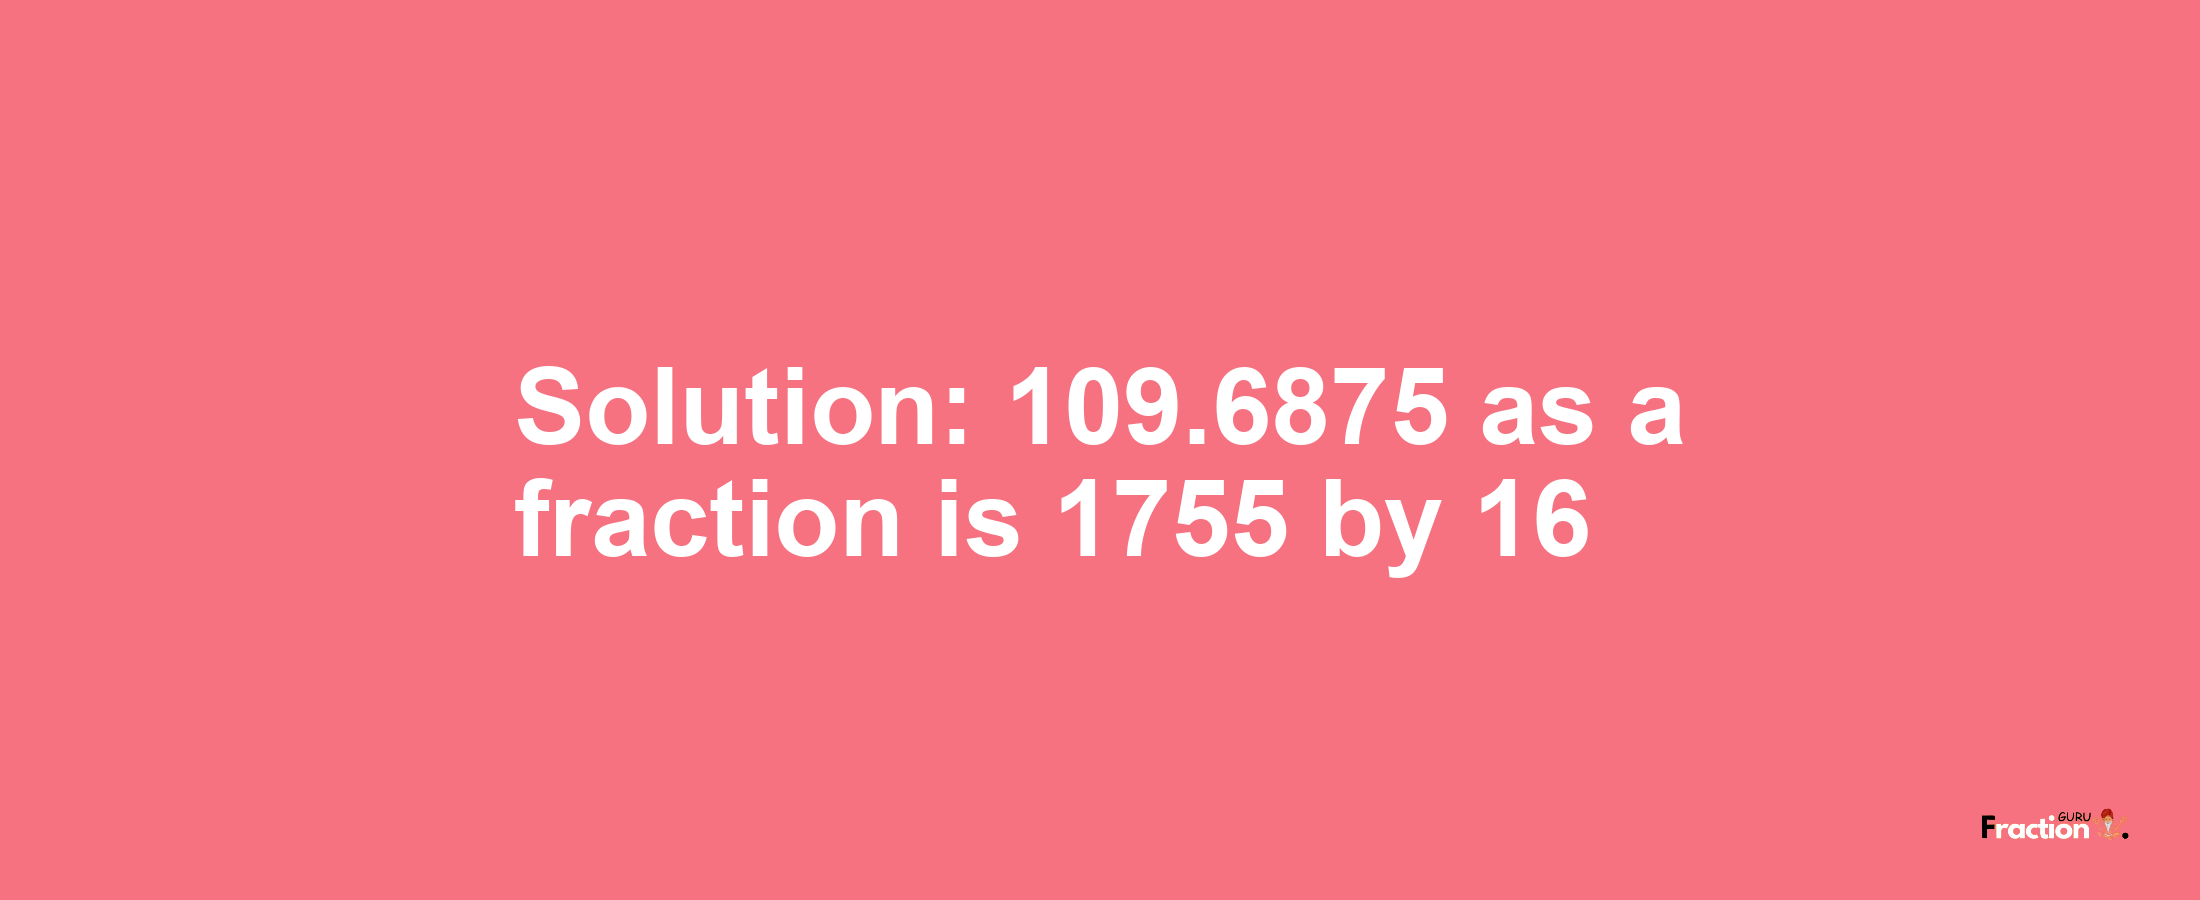 Solution:109.6875 as a fraction is 1755/16